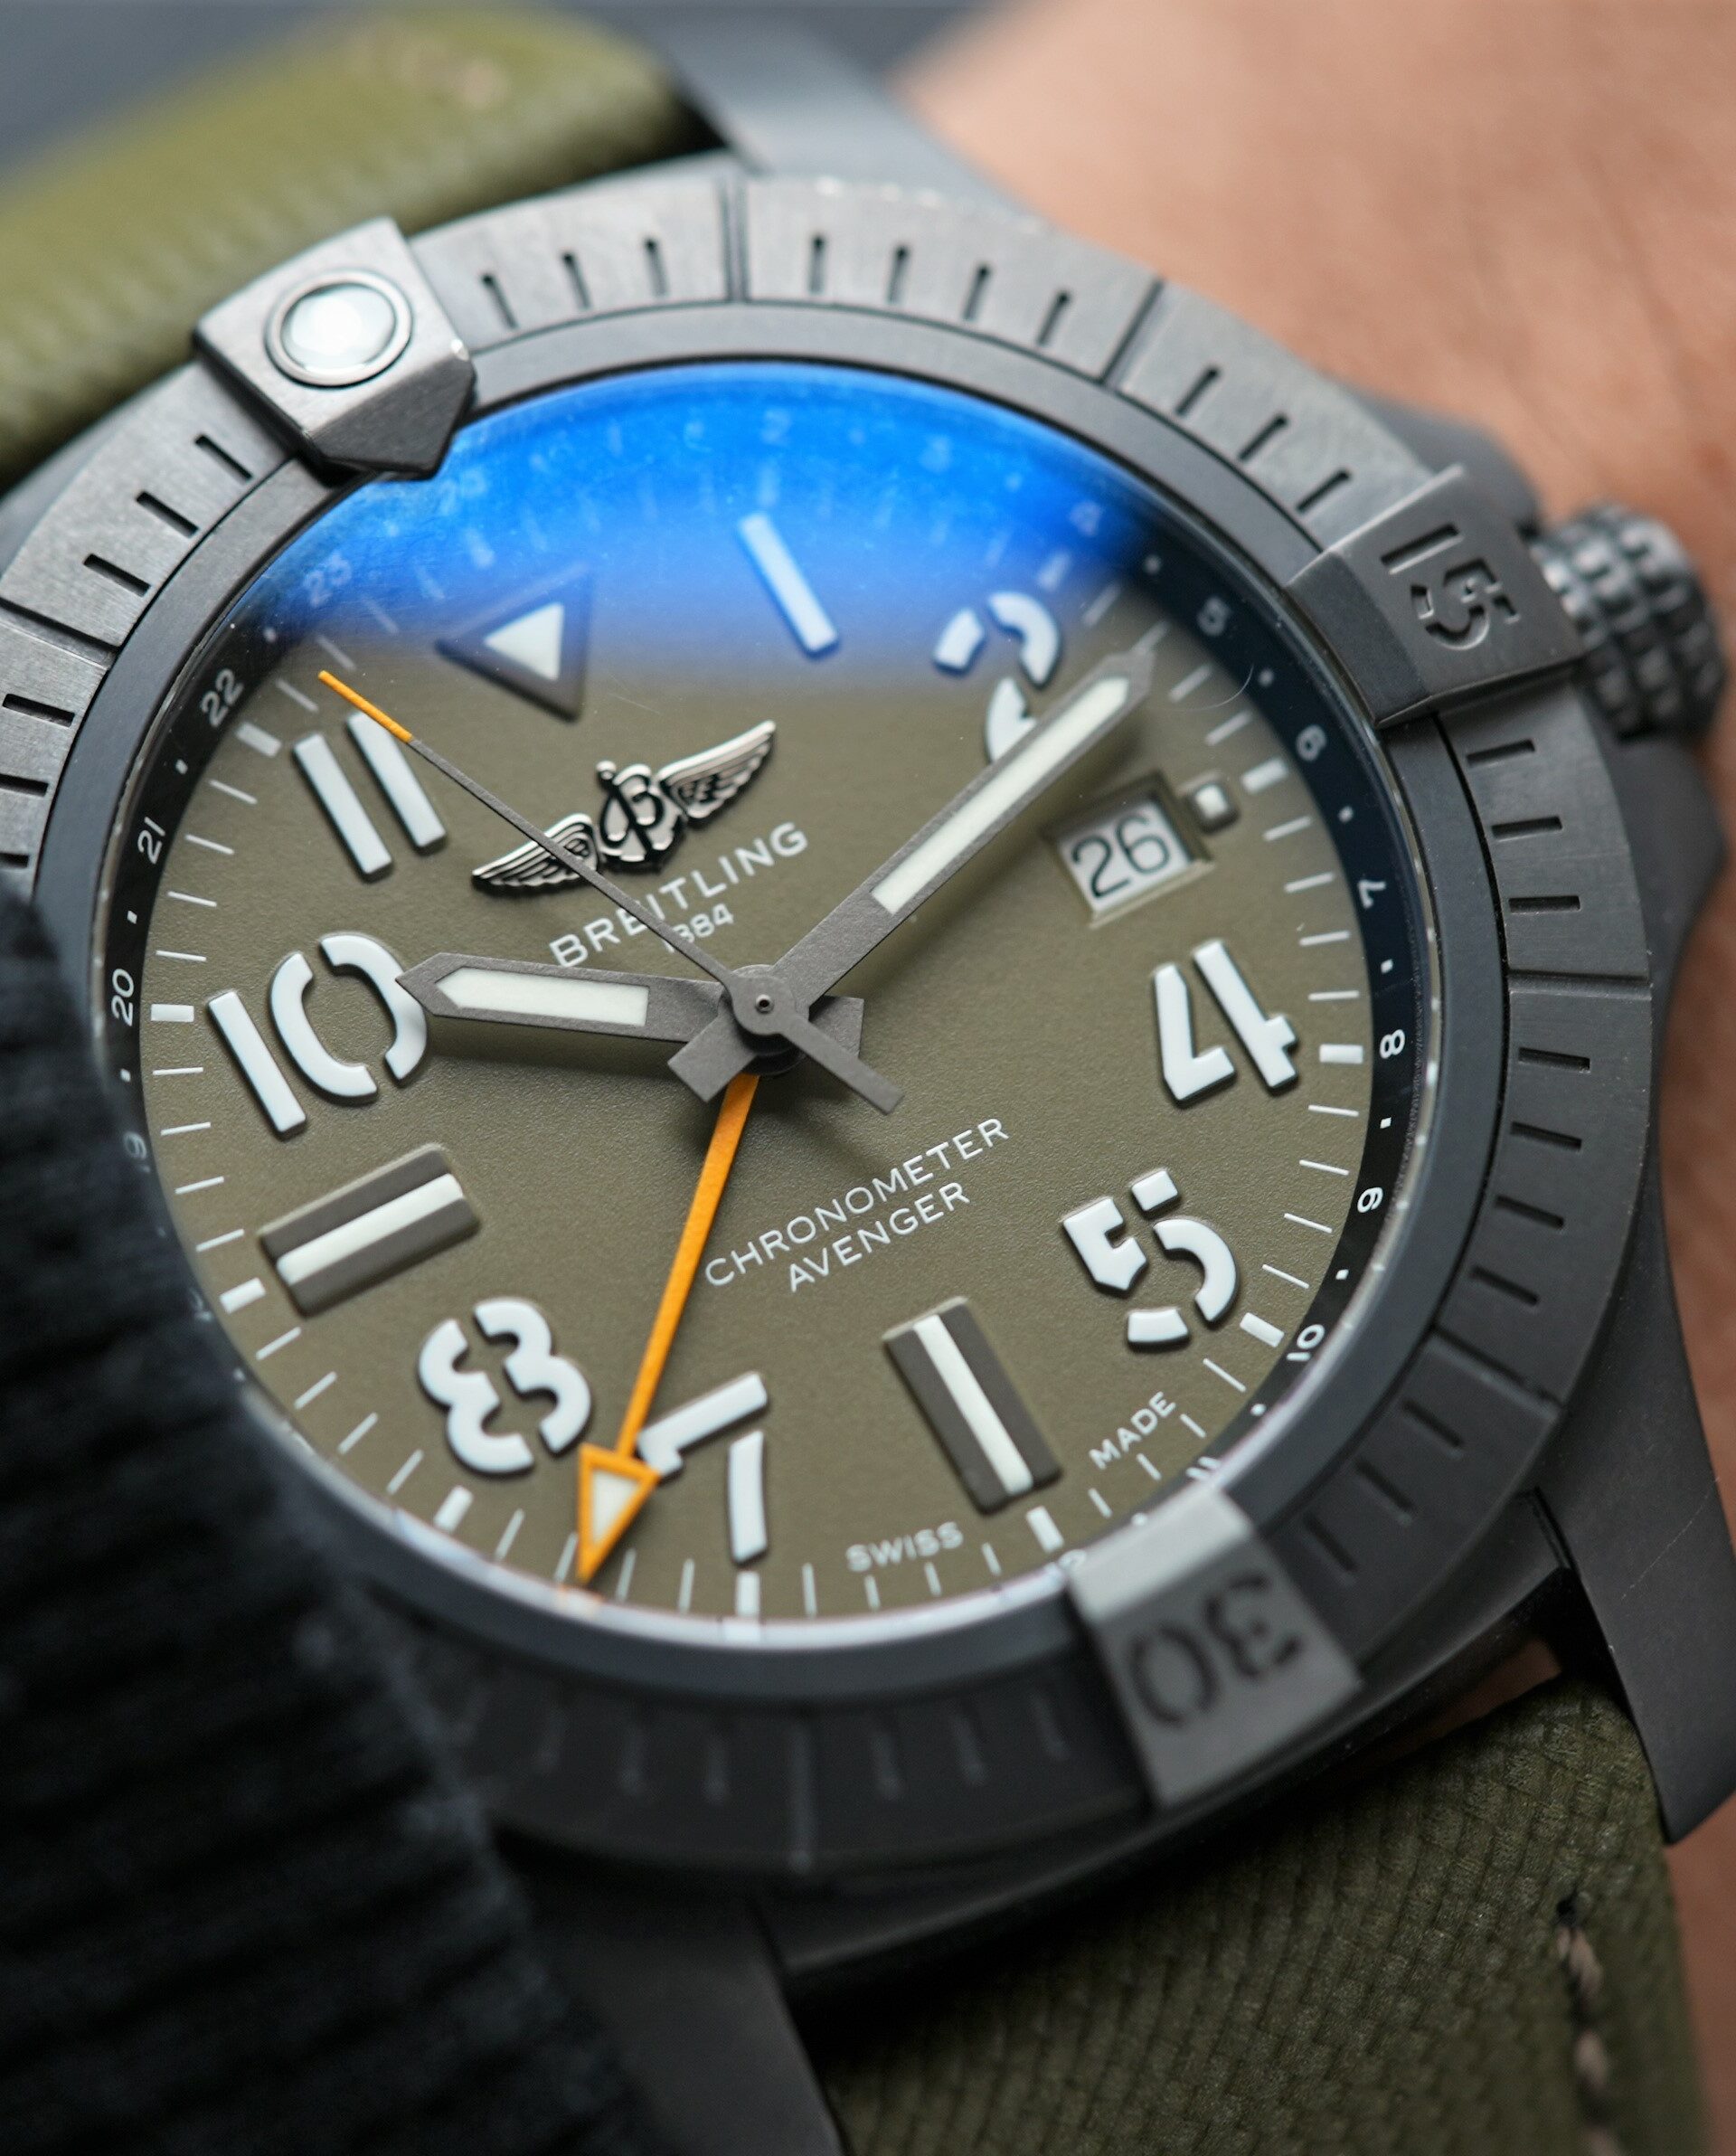 Breitling Avenger Automatic Gmt 45 Night Mission Limited V323952A1L1X1 wristwatch featured on the wrist.